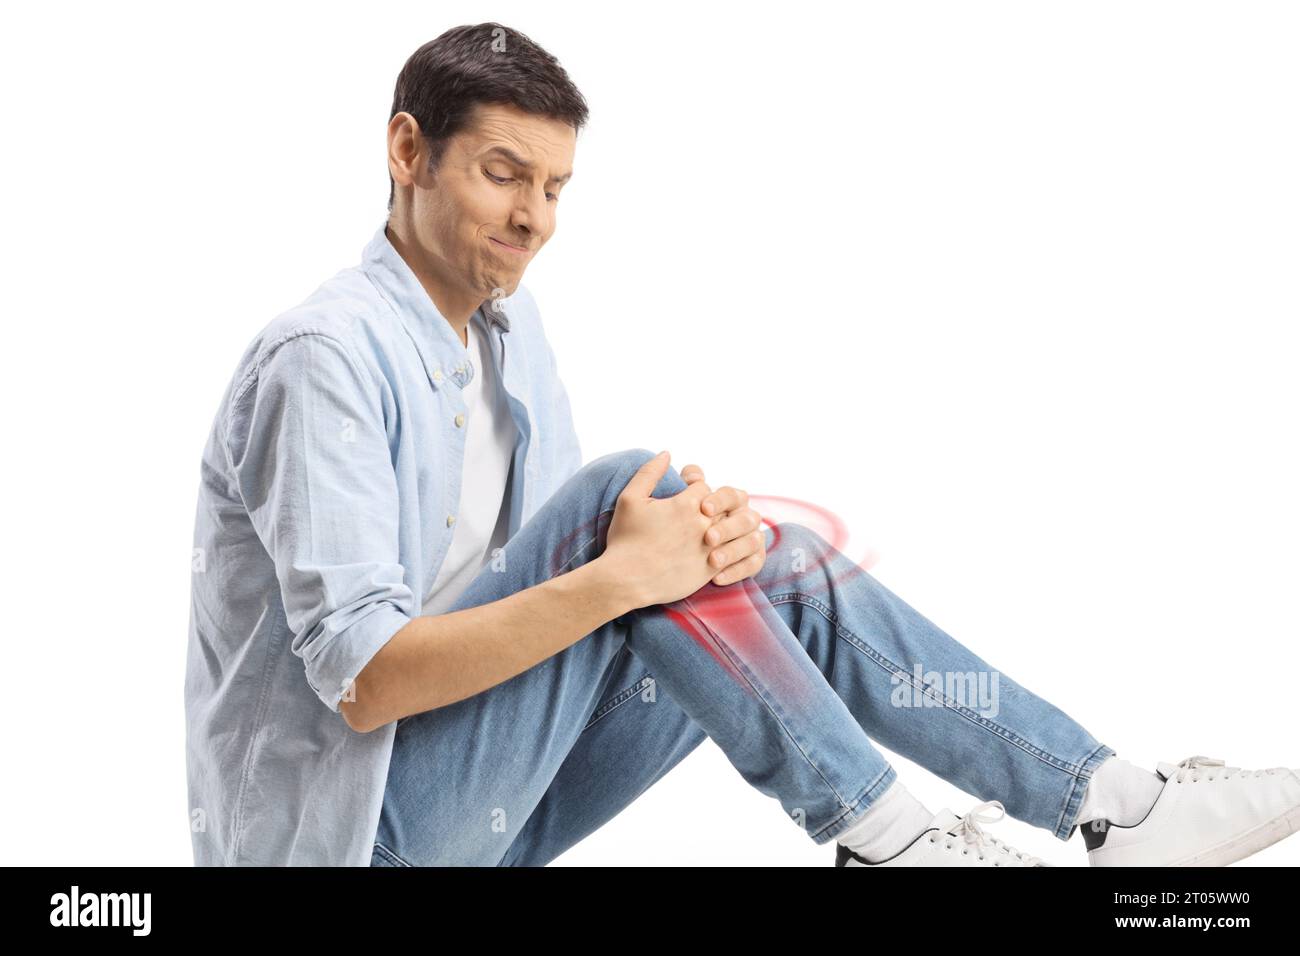 Young man sitting on the floor and holding his knee in pain, bone inflammation with red, isolated on white background Stock Photo